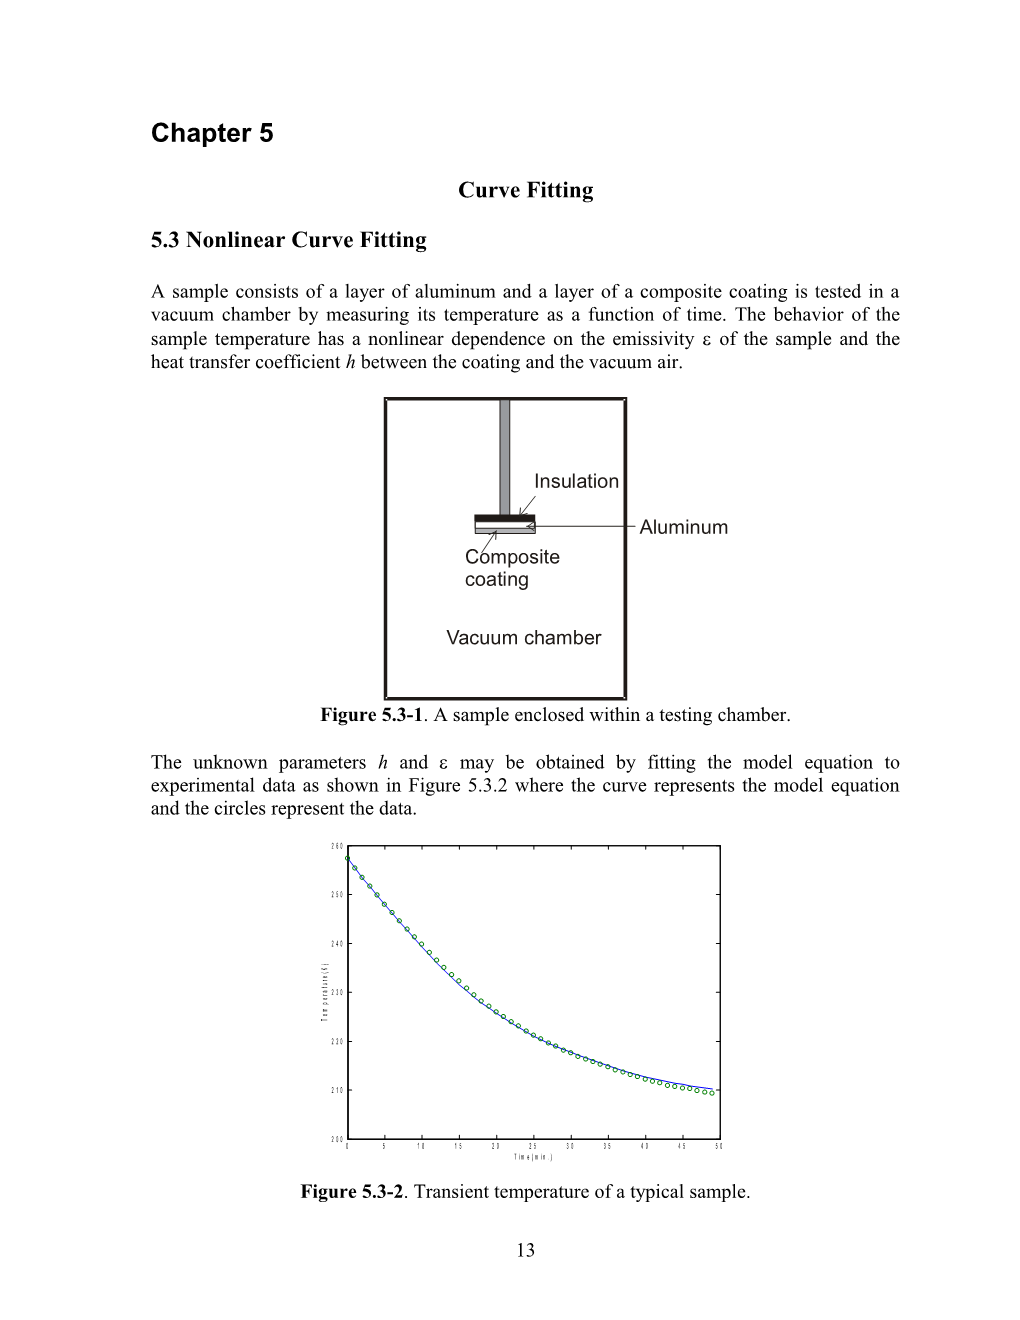 5.3 Nonlinear Curve Fitting